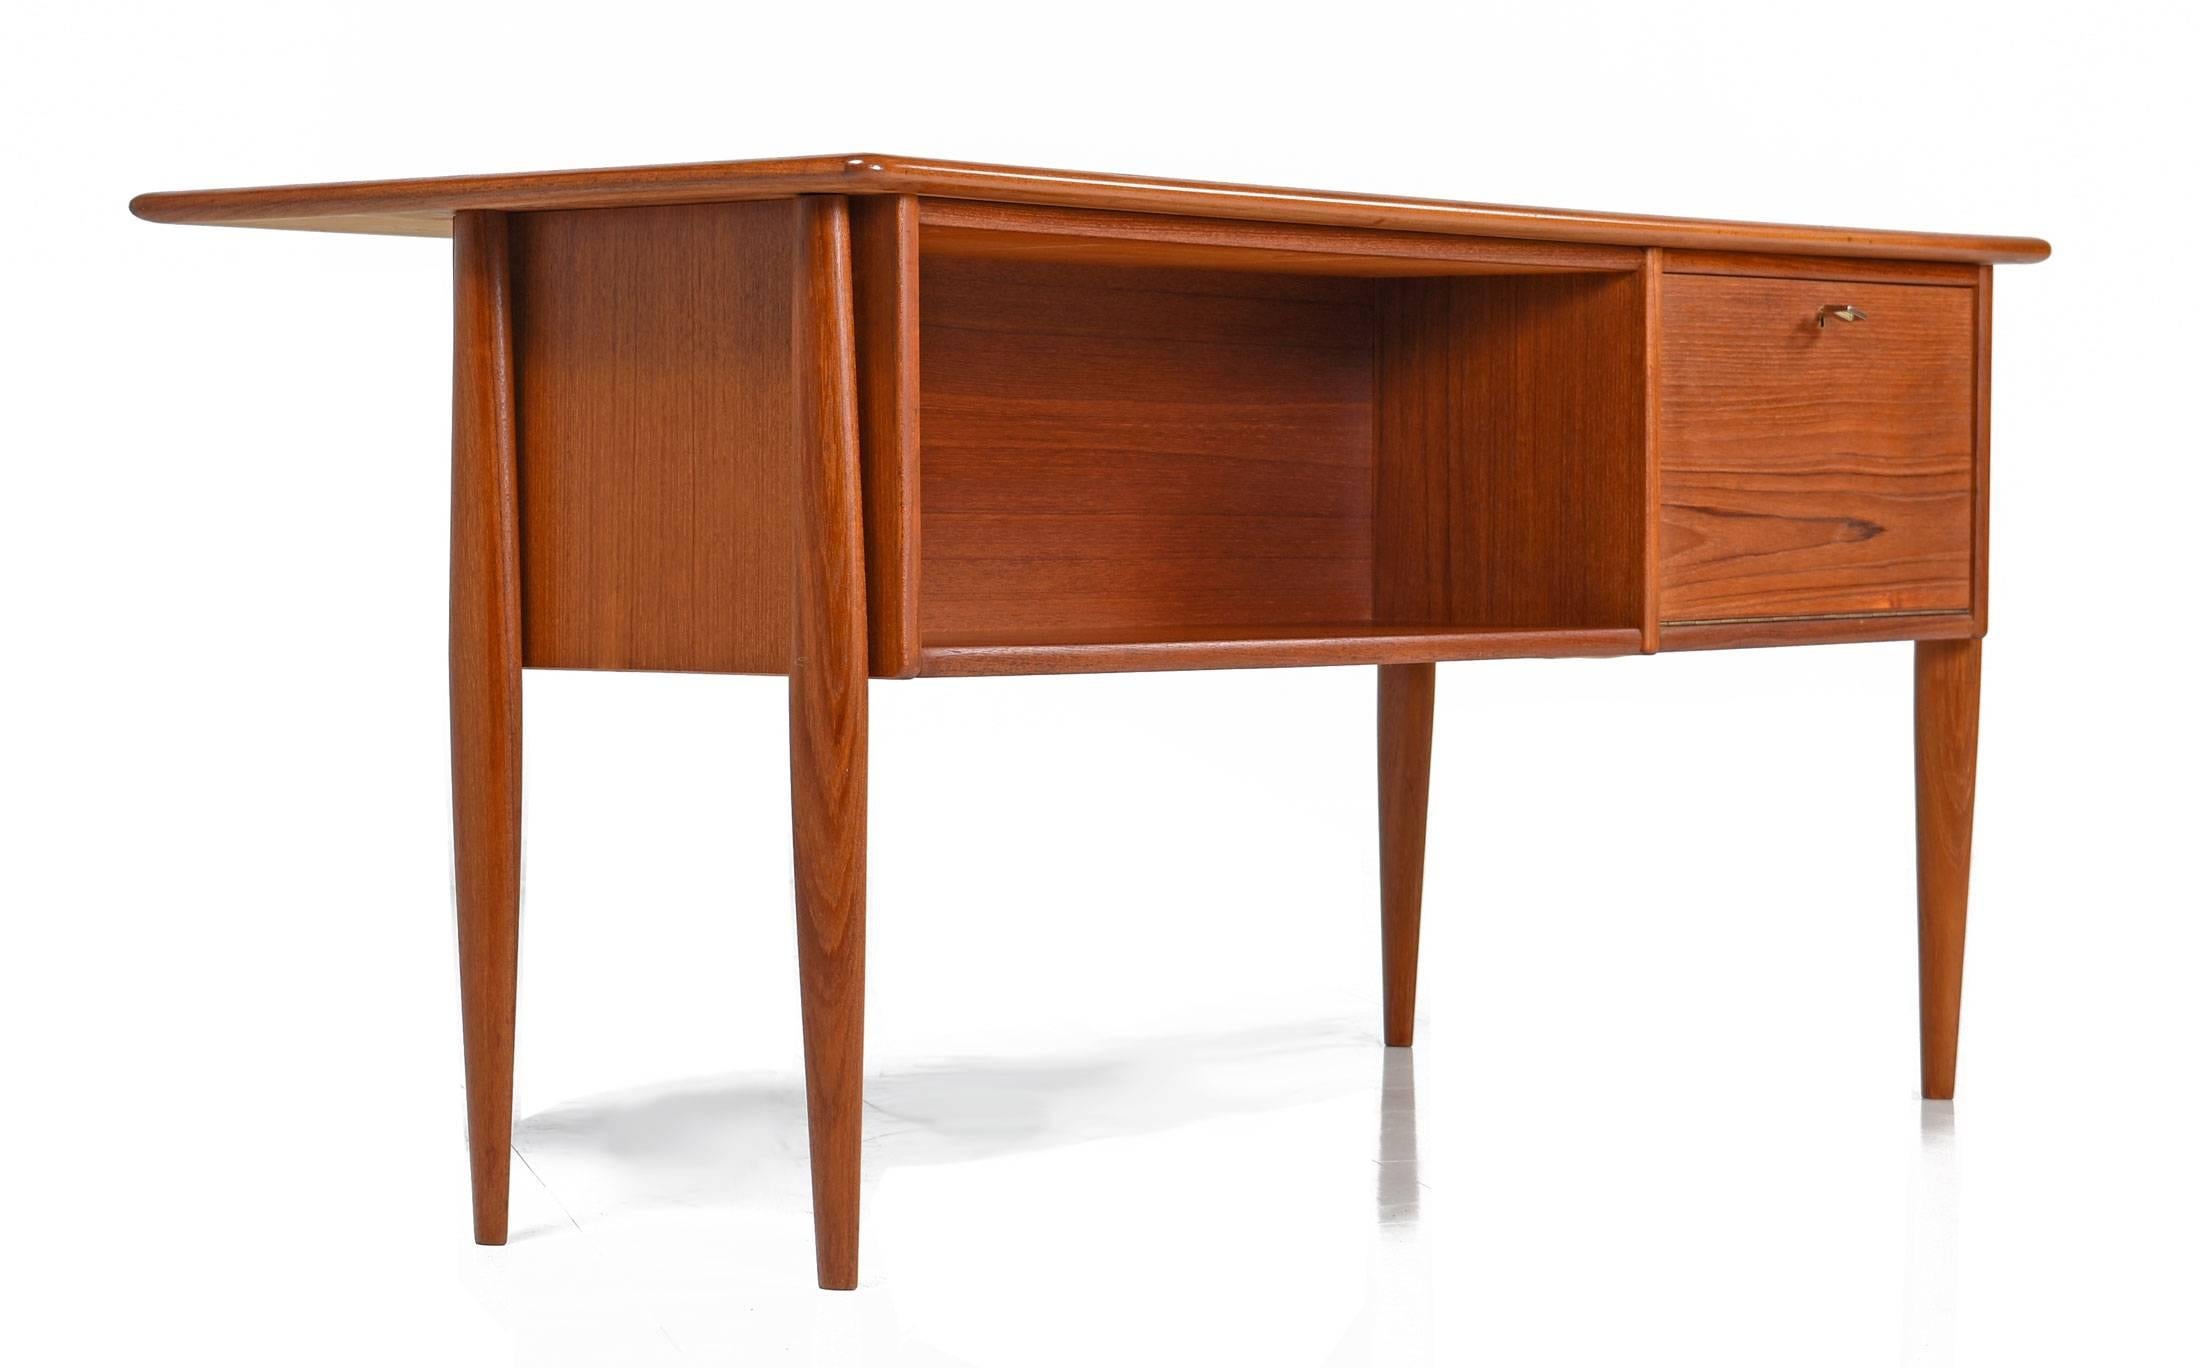 Beautifully restored Scandinavian Modern teak desk, made in the 1960s. This rare and unique desk is two sided, finished on both sides, making it a real stunner from all angels. The front of the desk features a left-hand column of three drawers with